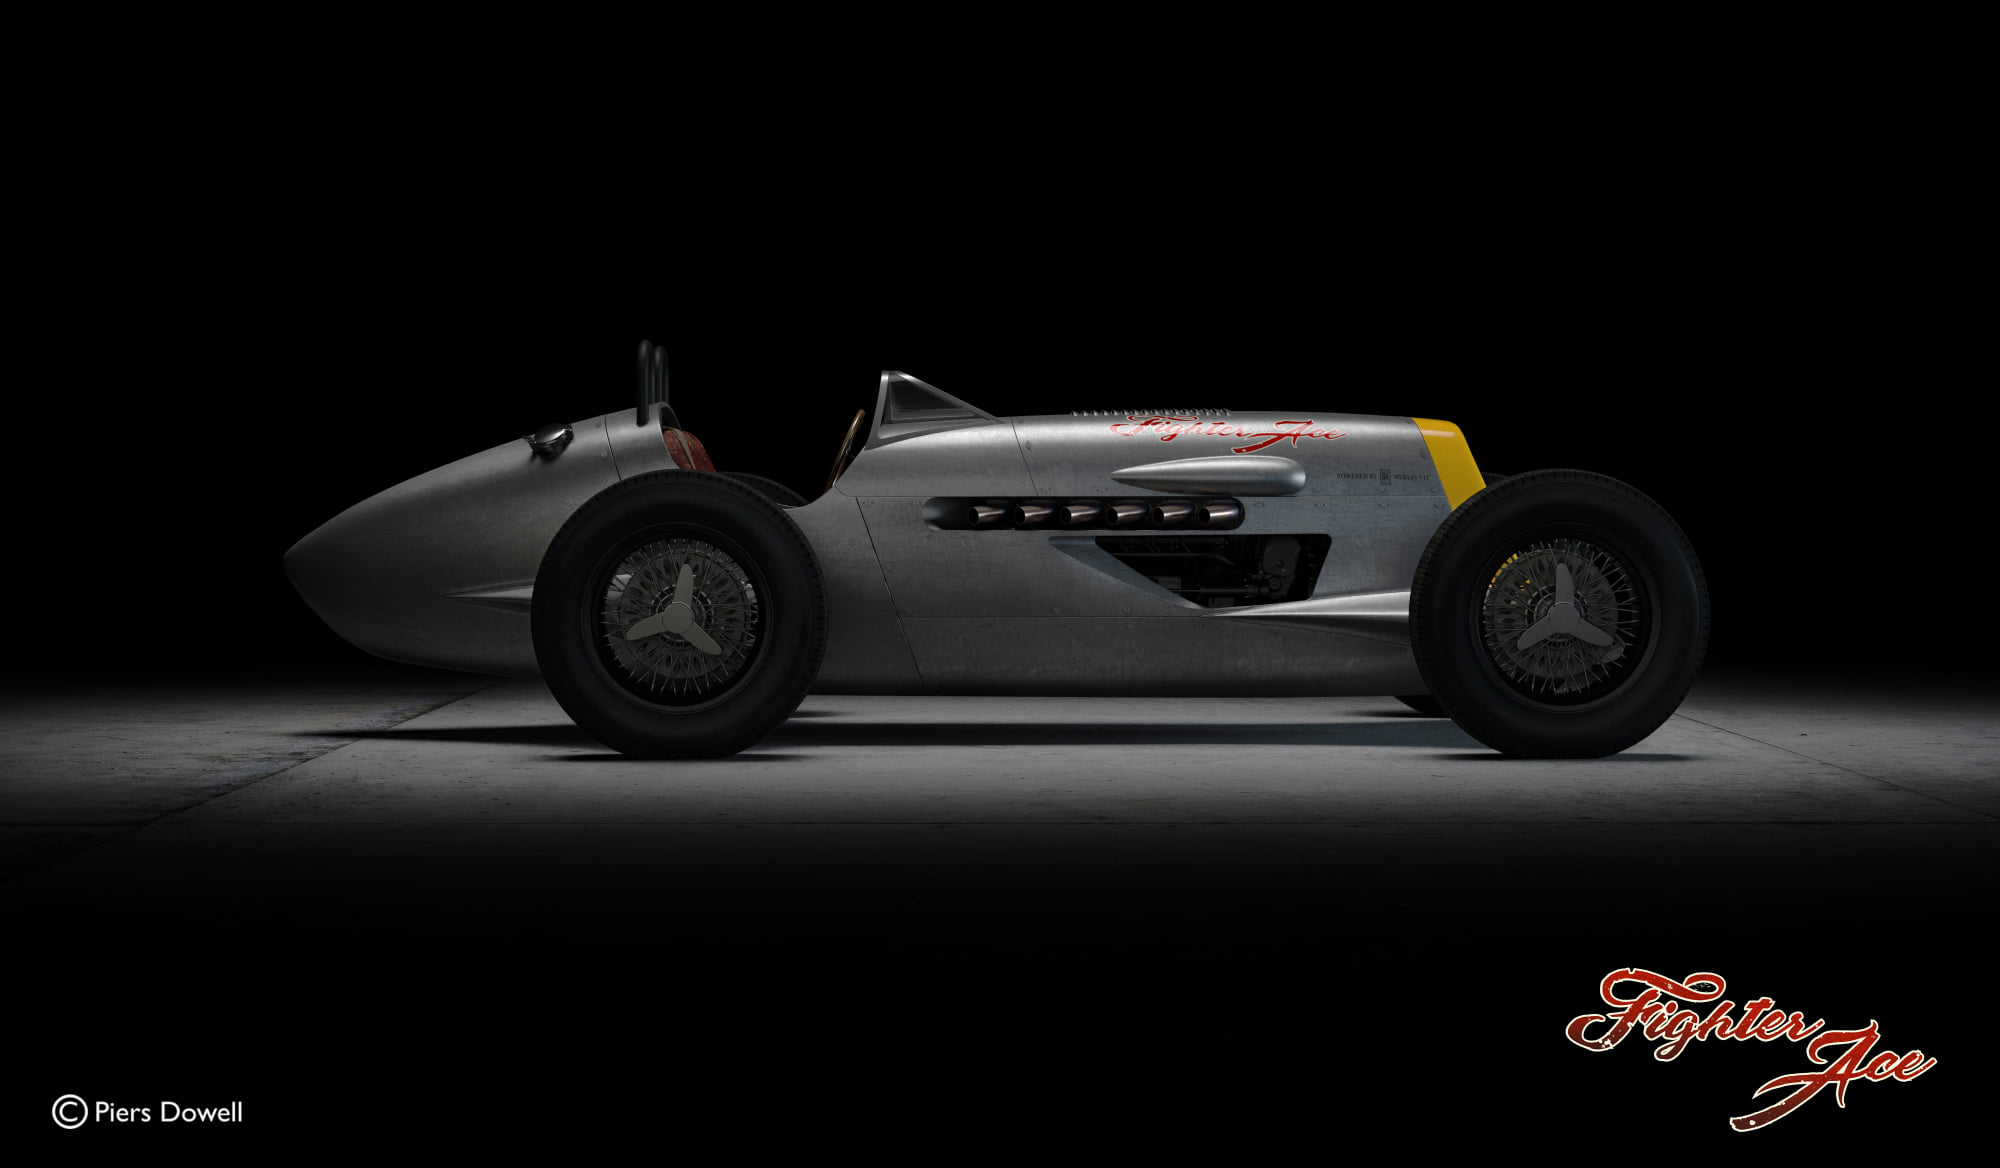 British artist wants to build a Spitfire-powered racer